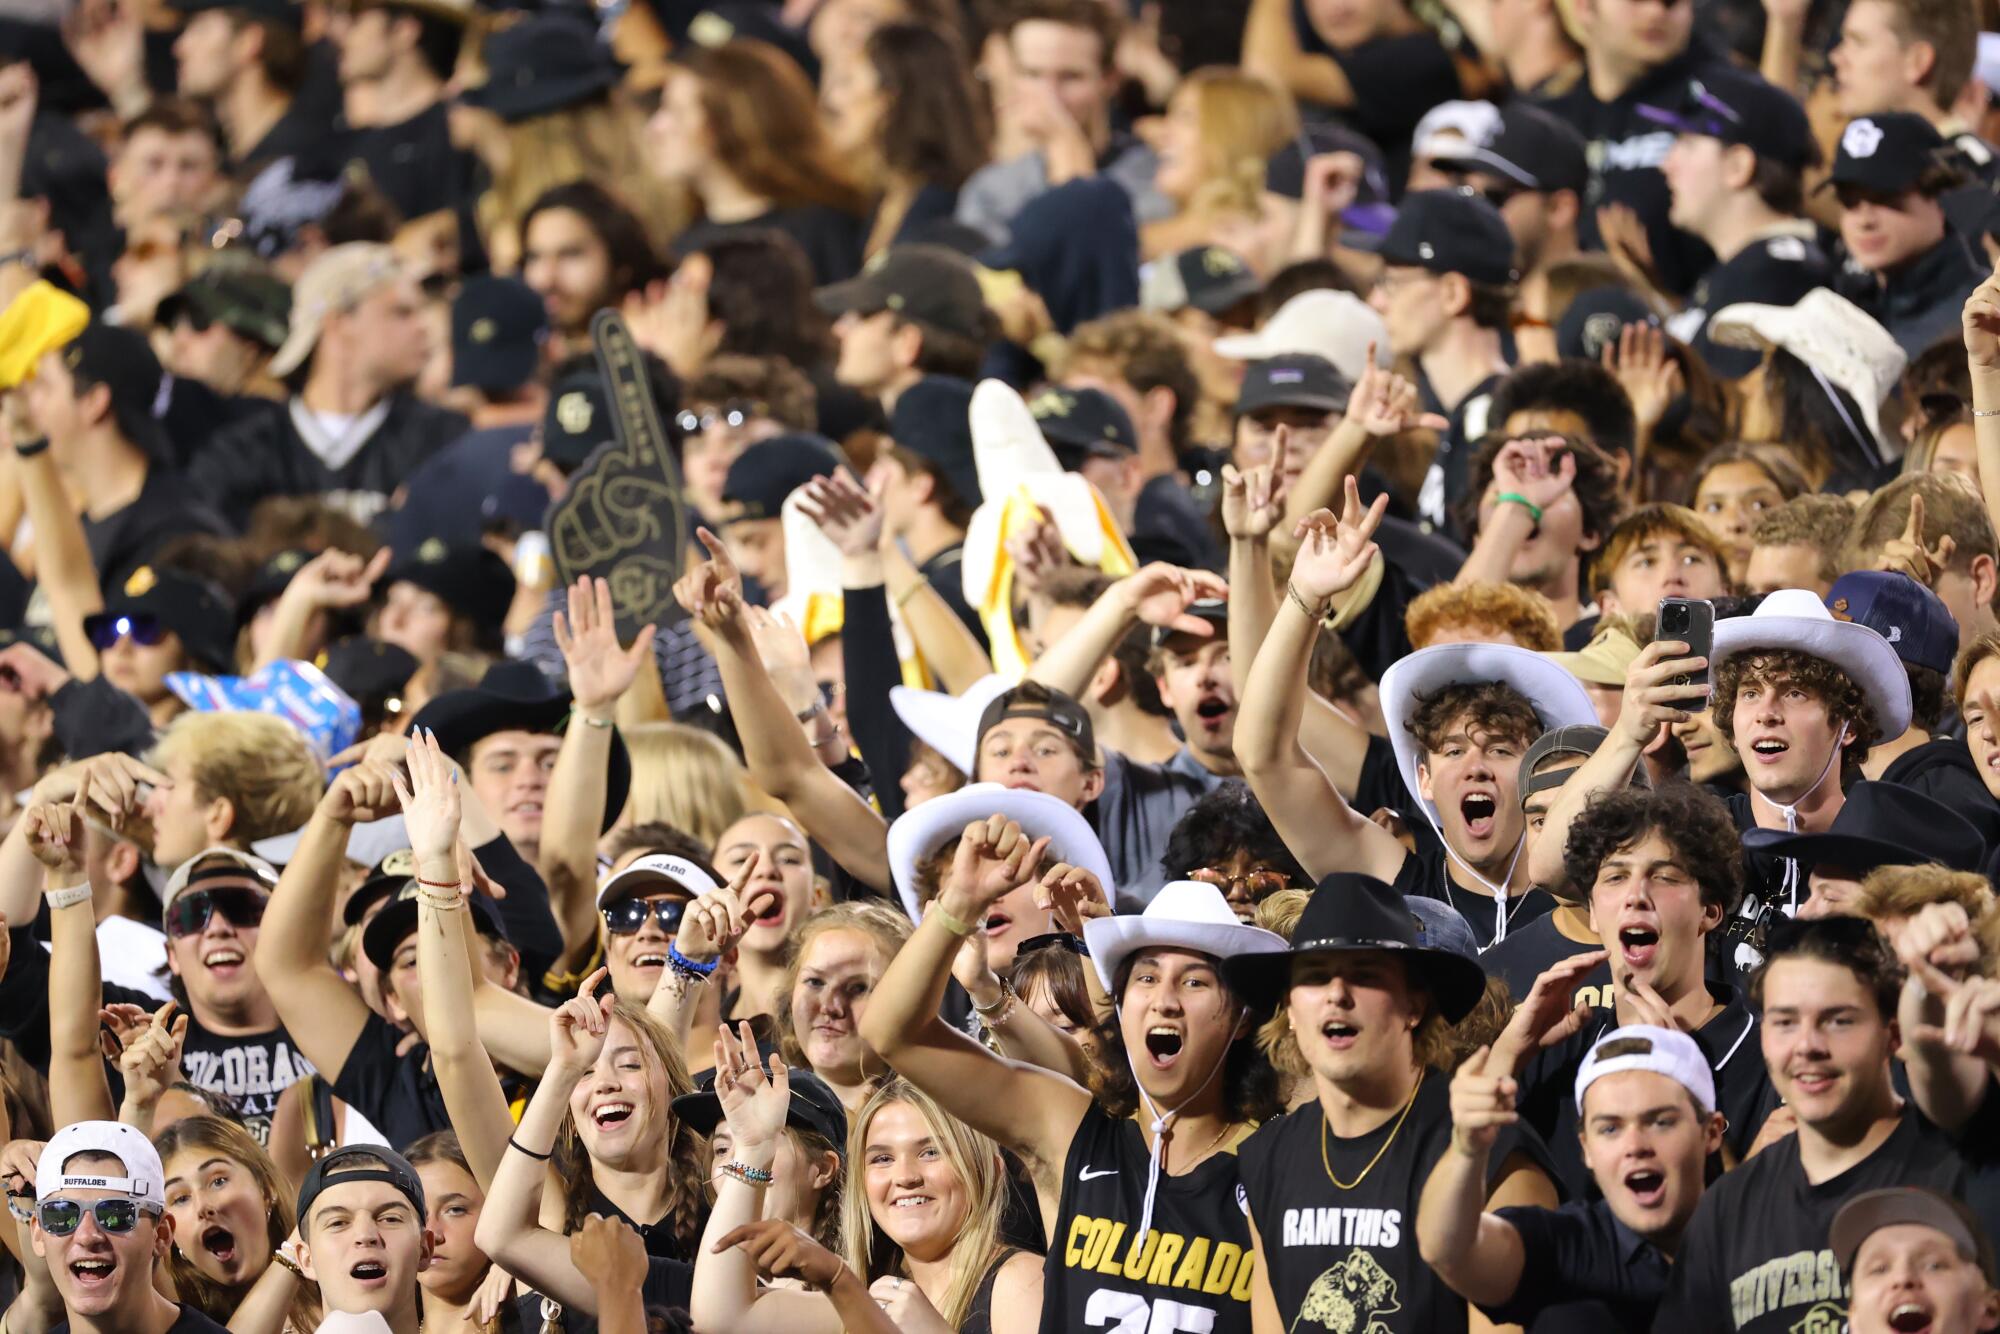 Colorado fans cheer during the Buffaloes' game against Colorado State Sept. 16 at Folsom Field in Boulder, Colo. 